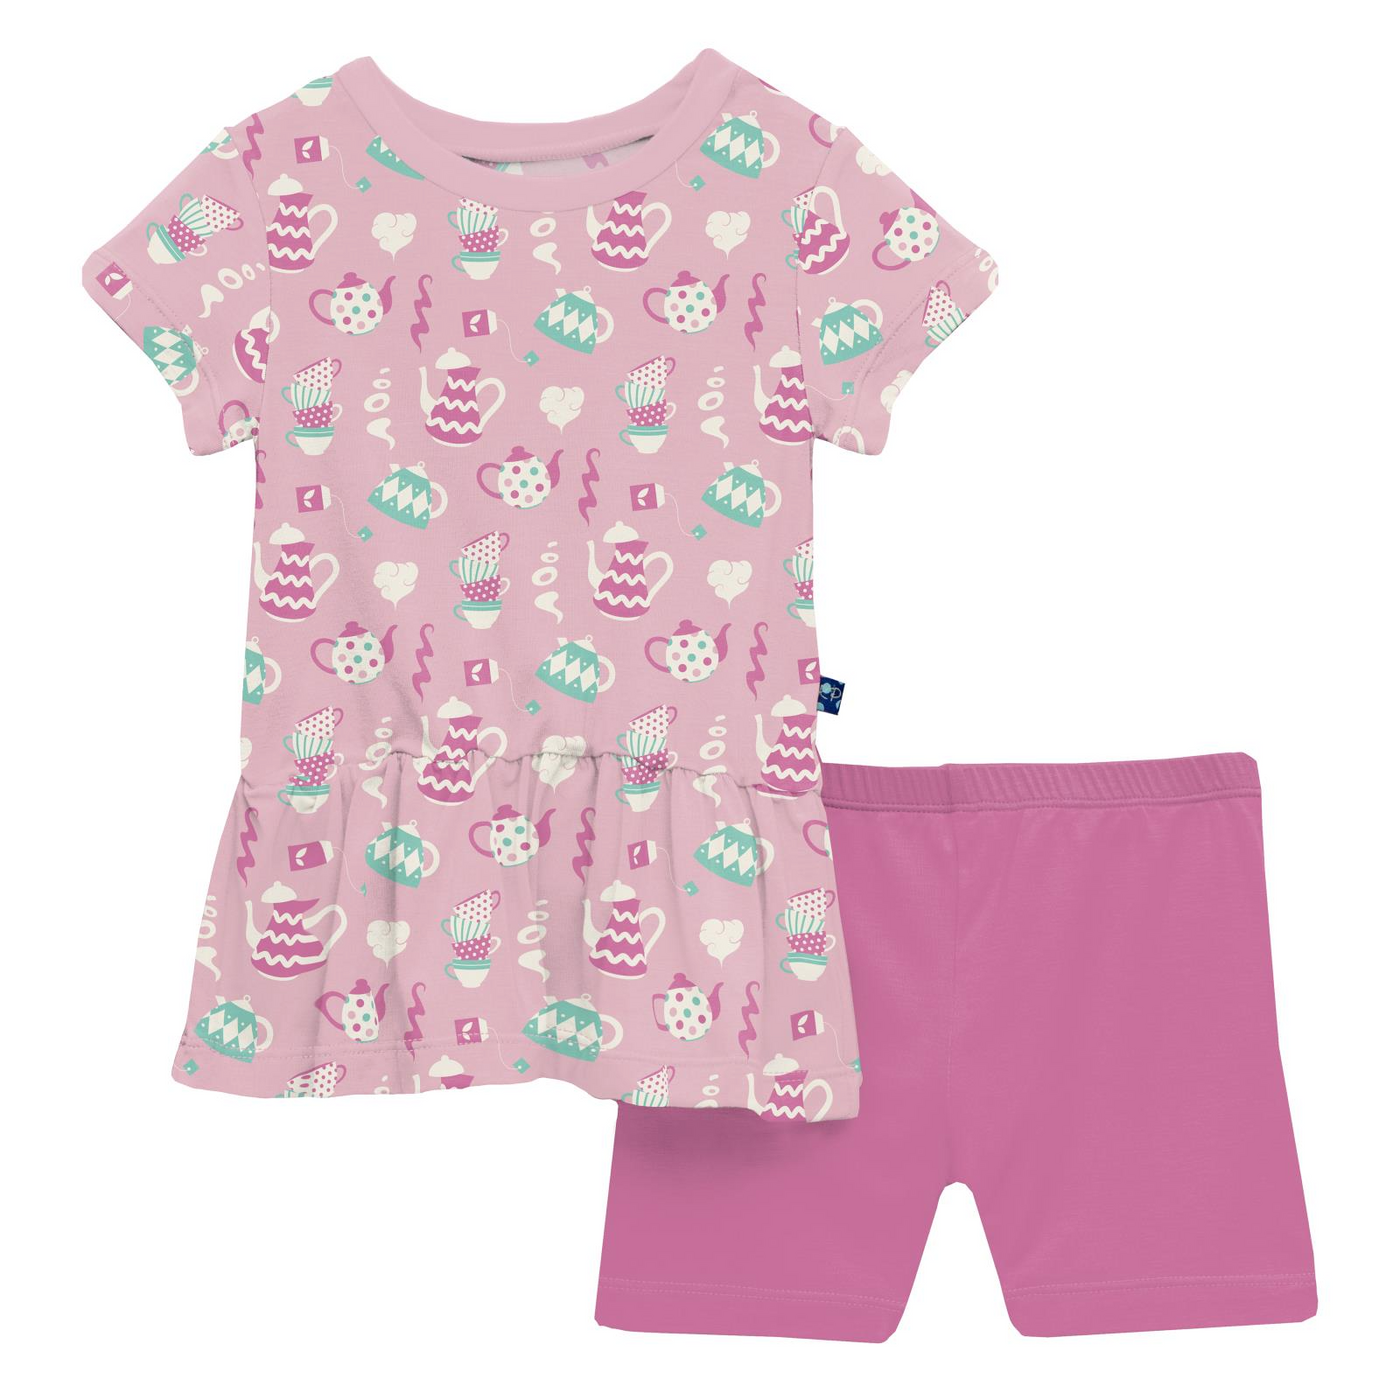 Kickee Pants Playtime Outfit Set: Cake Pop Tea Party